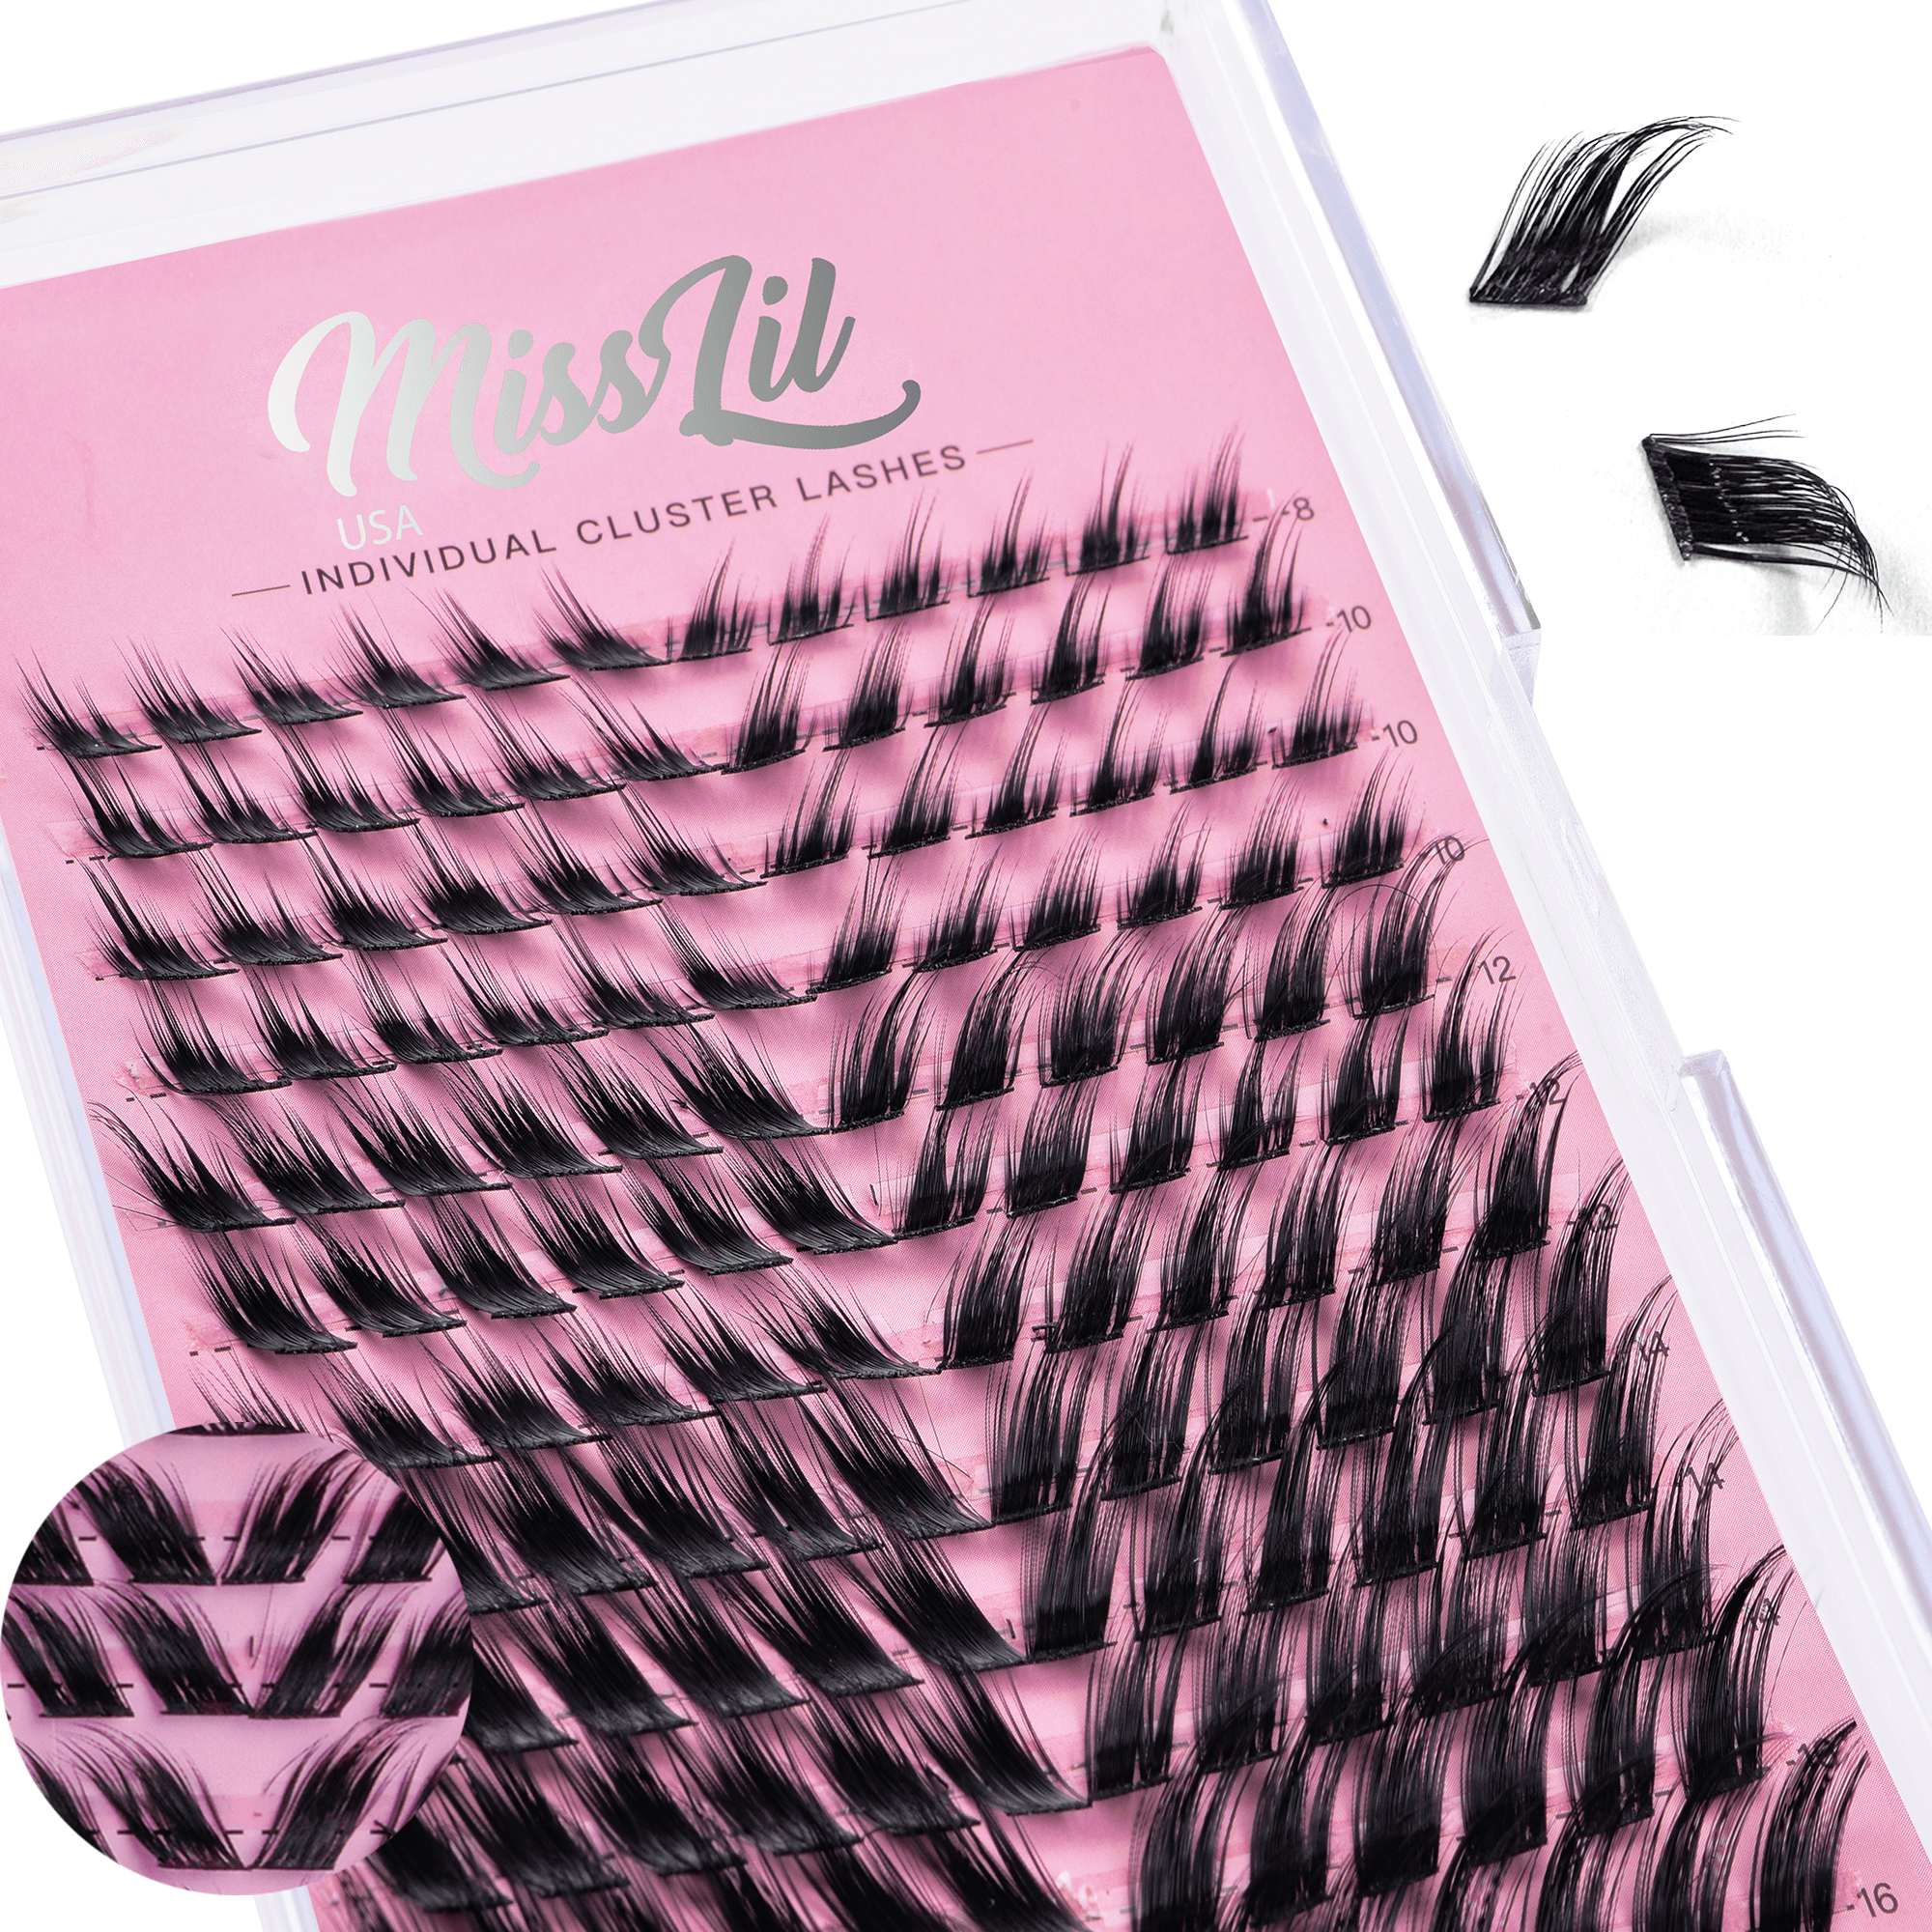  Individual Cluster lashes AD-51 MIX - Miss Lil USA